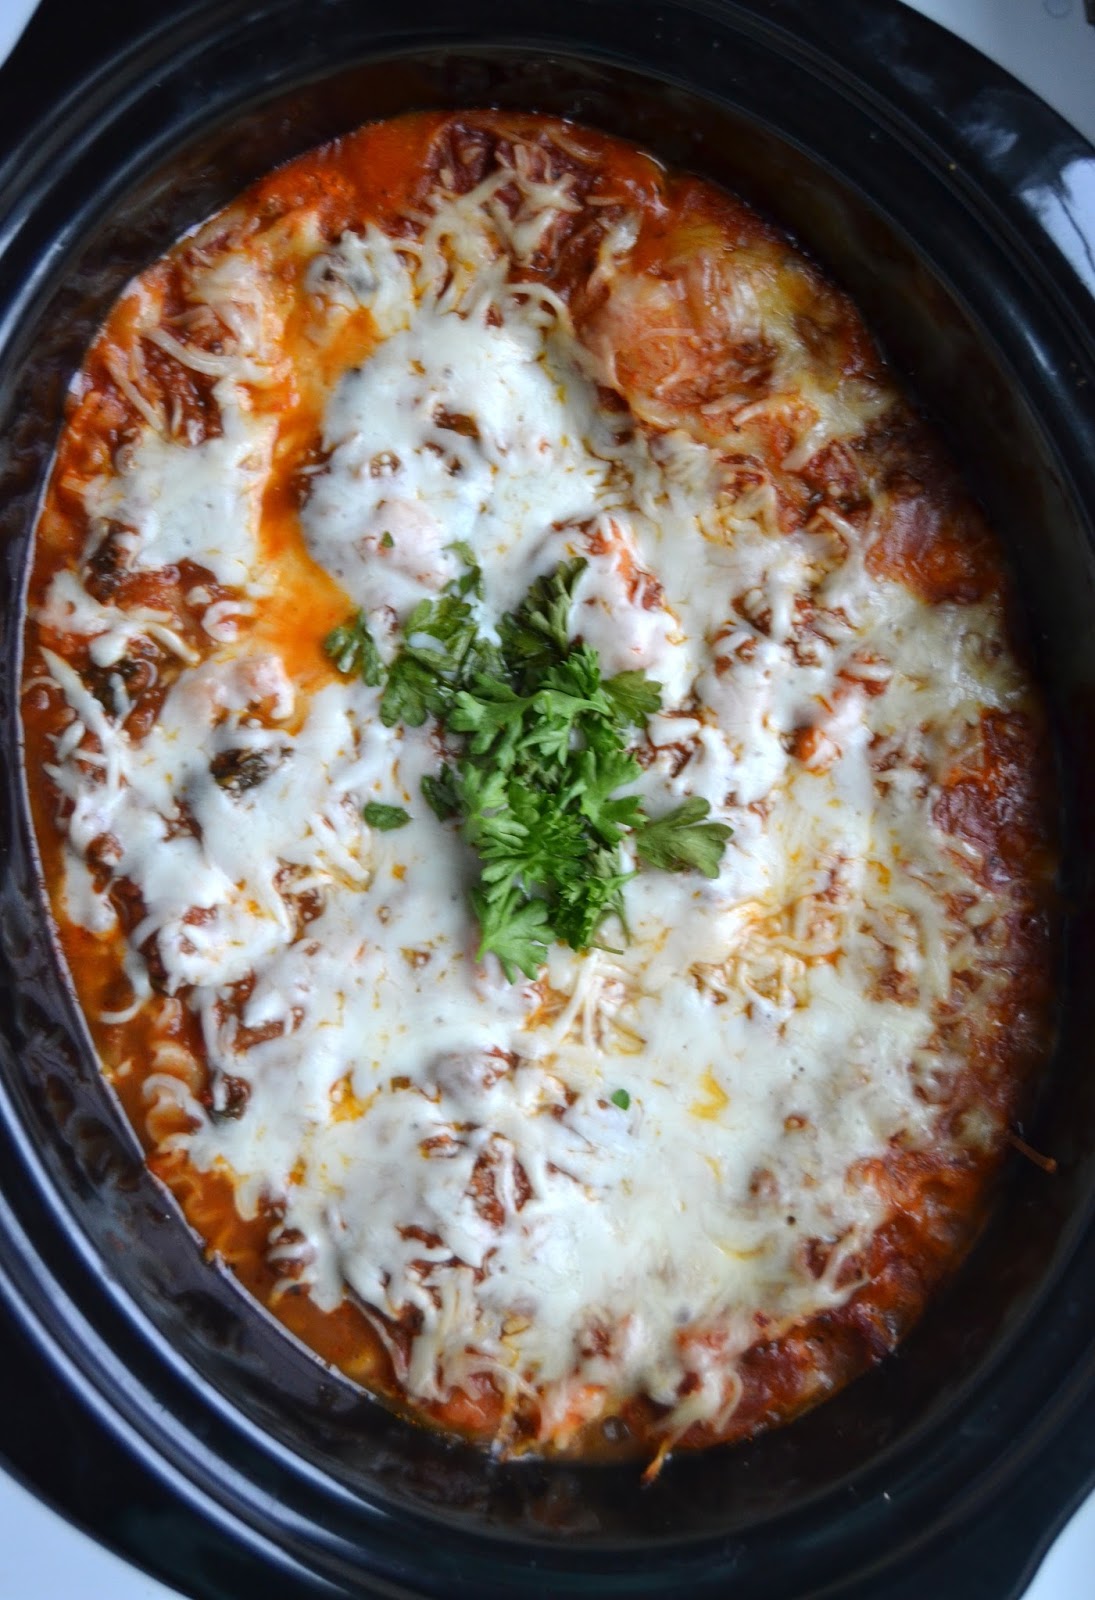 The Nutritionist Reviews: Slow Cooker Veggie Loaded Lasagna